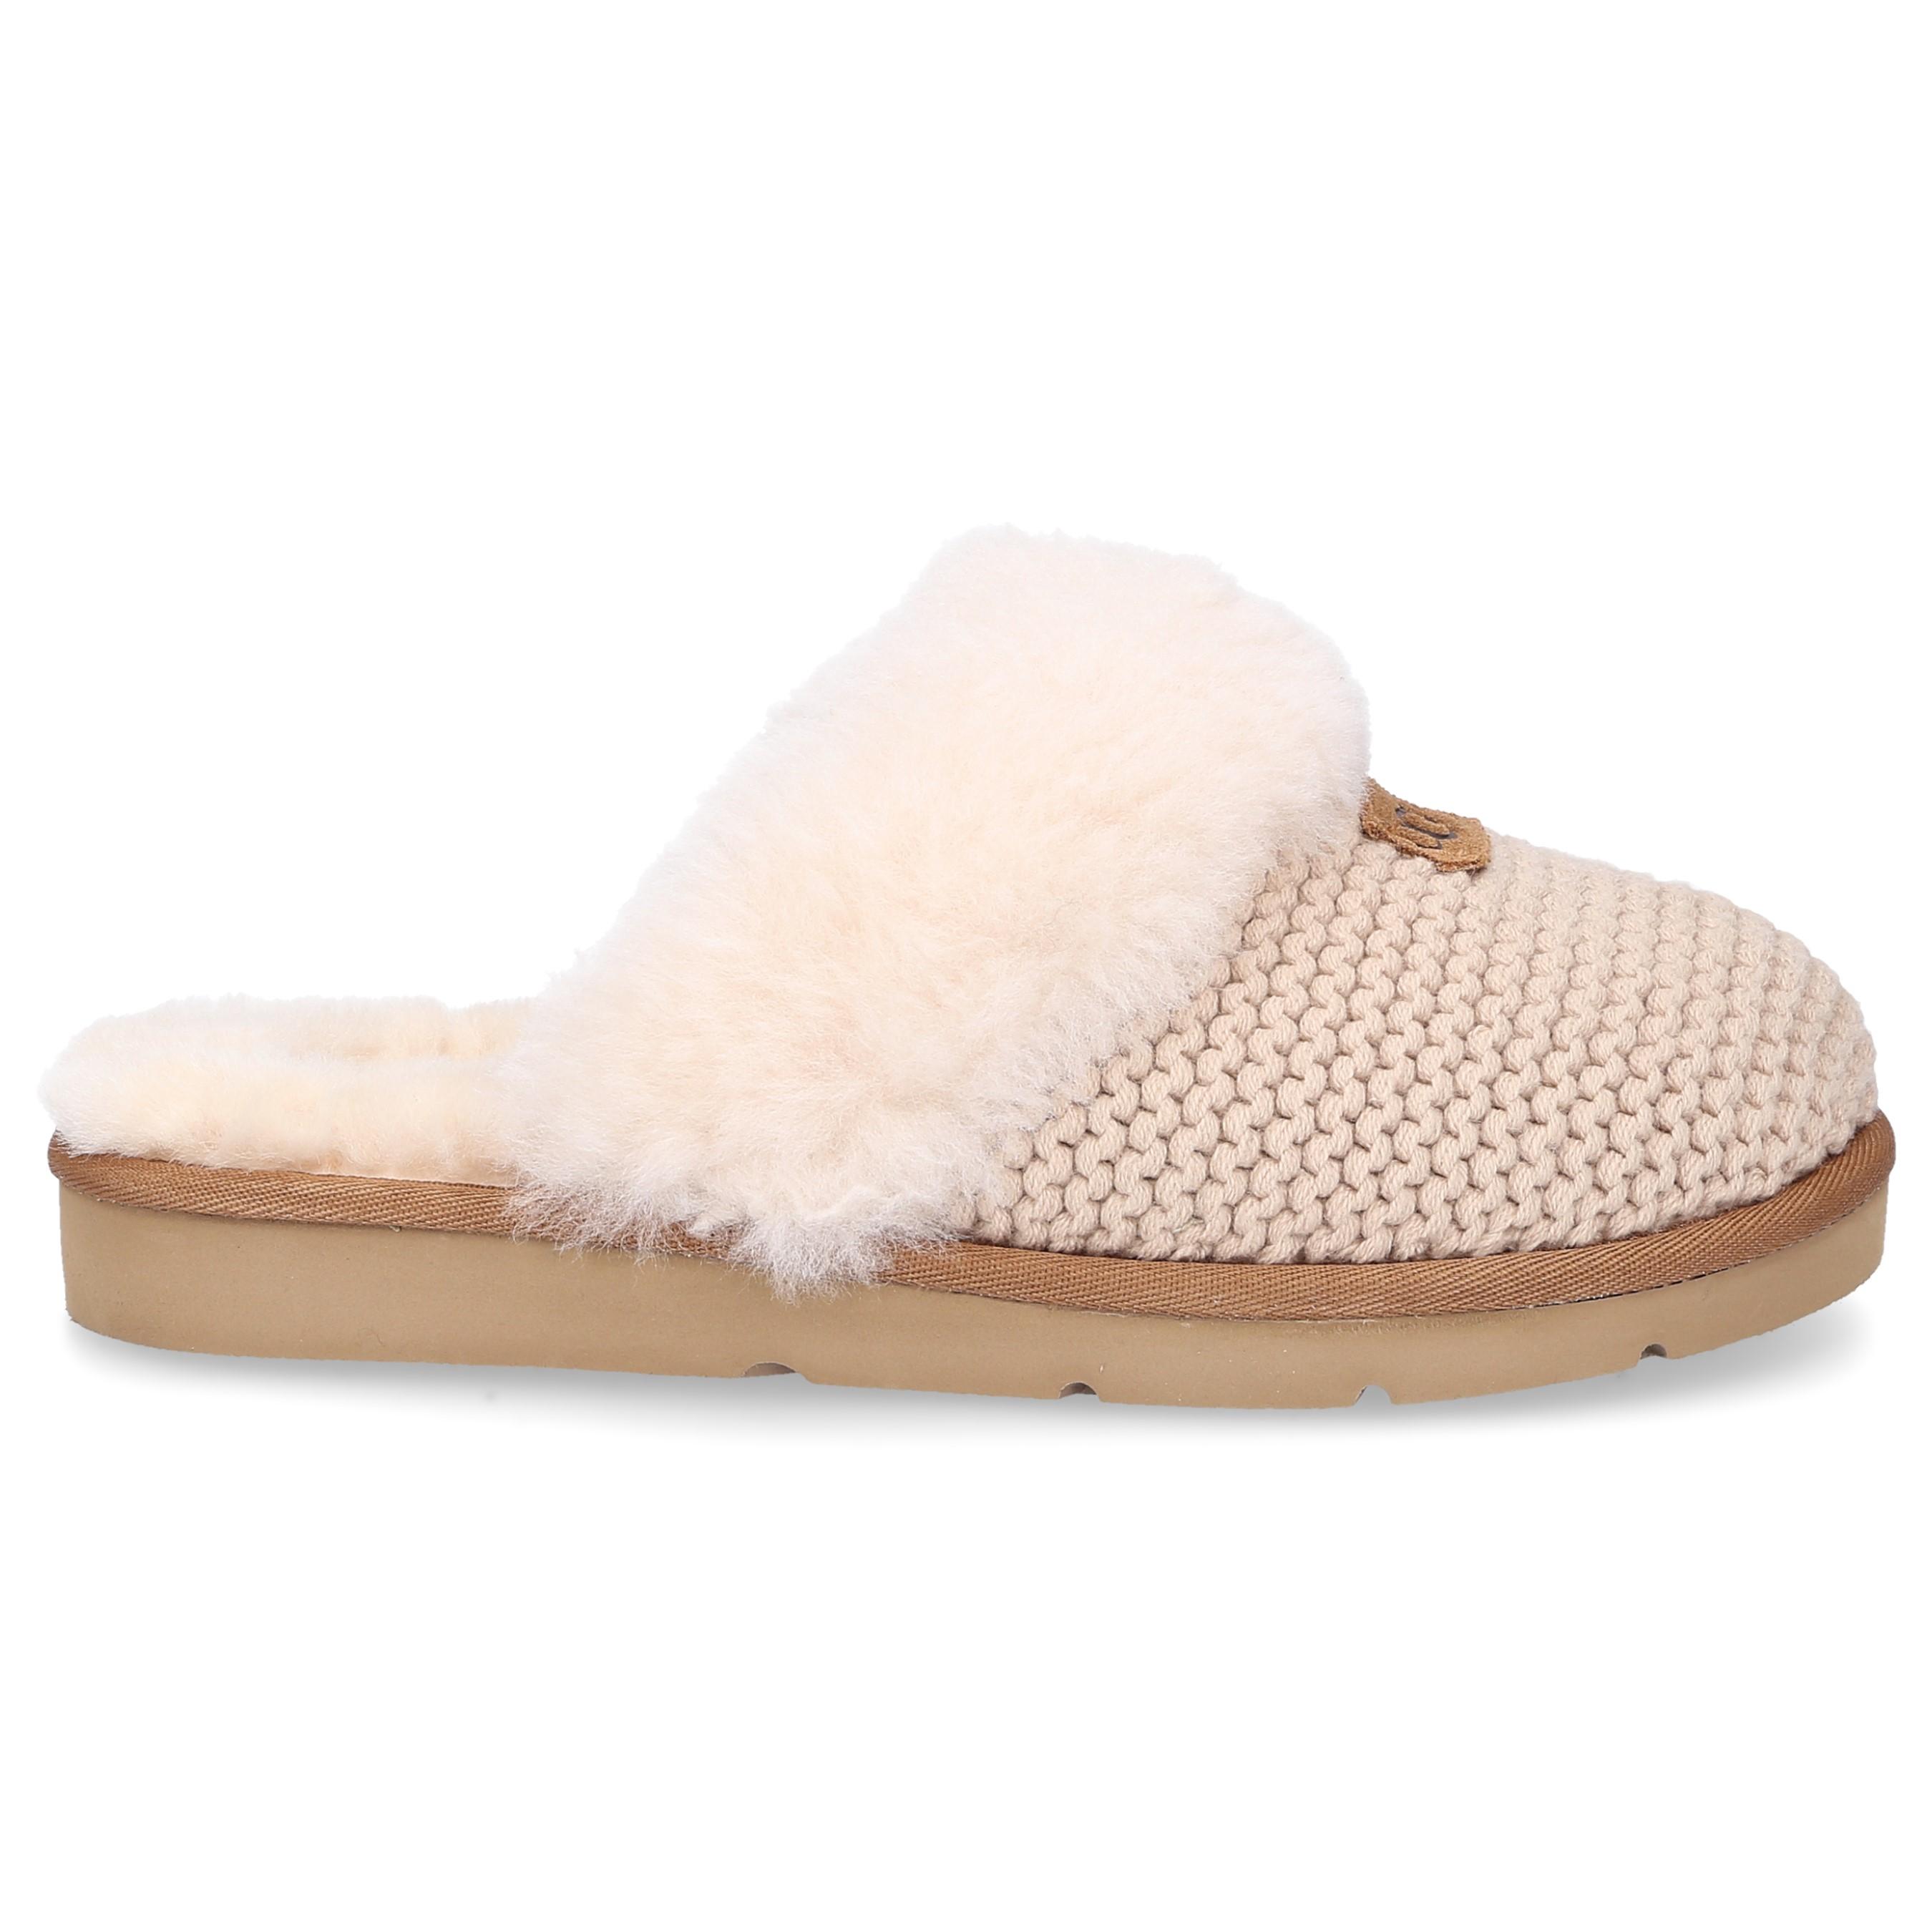 Lyst - Ugg Slippers Cozy Knit Cotton Logo Pale Pink in Natural